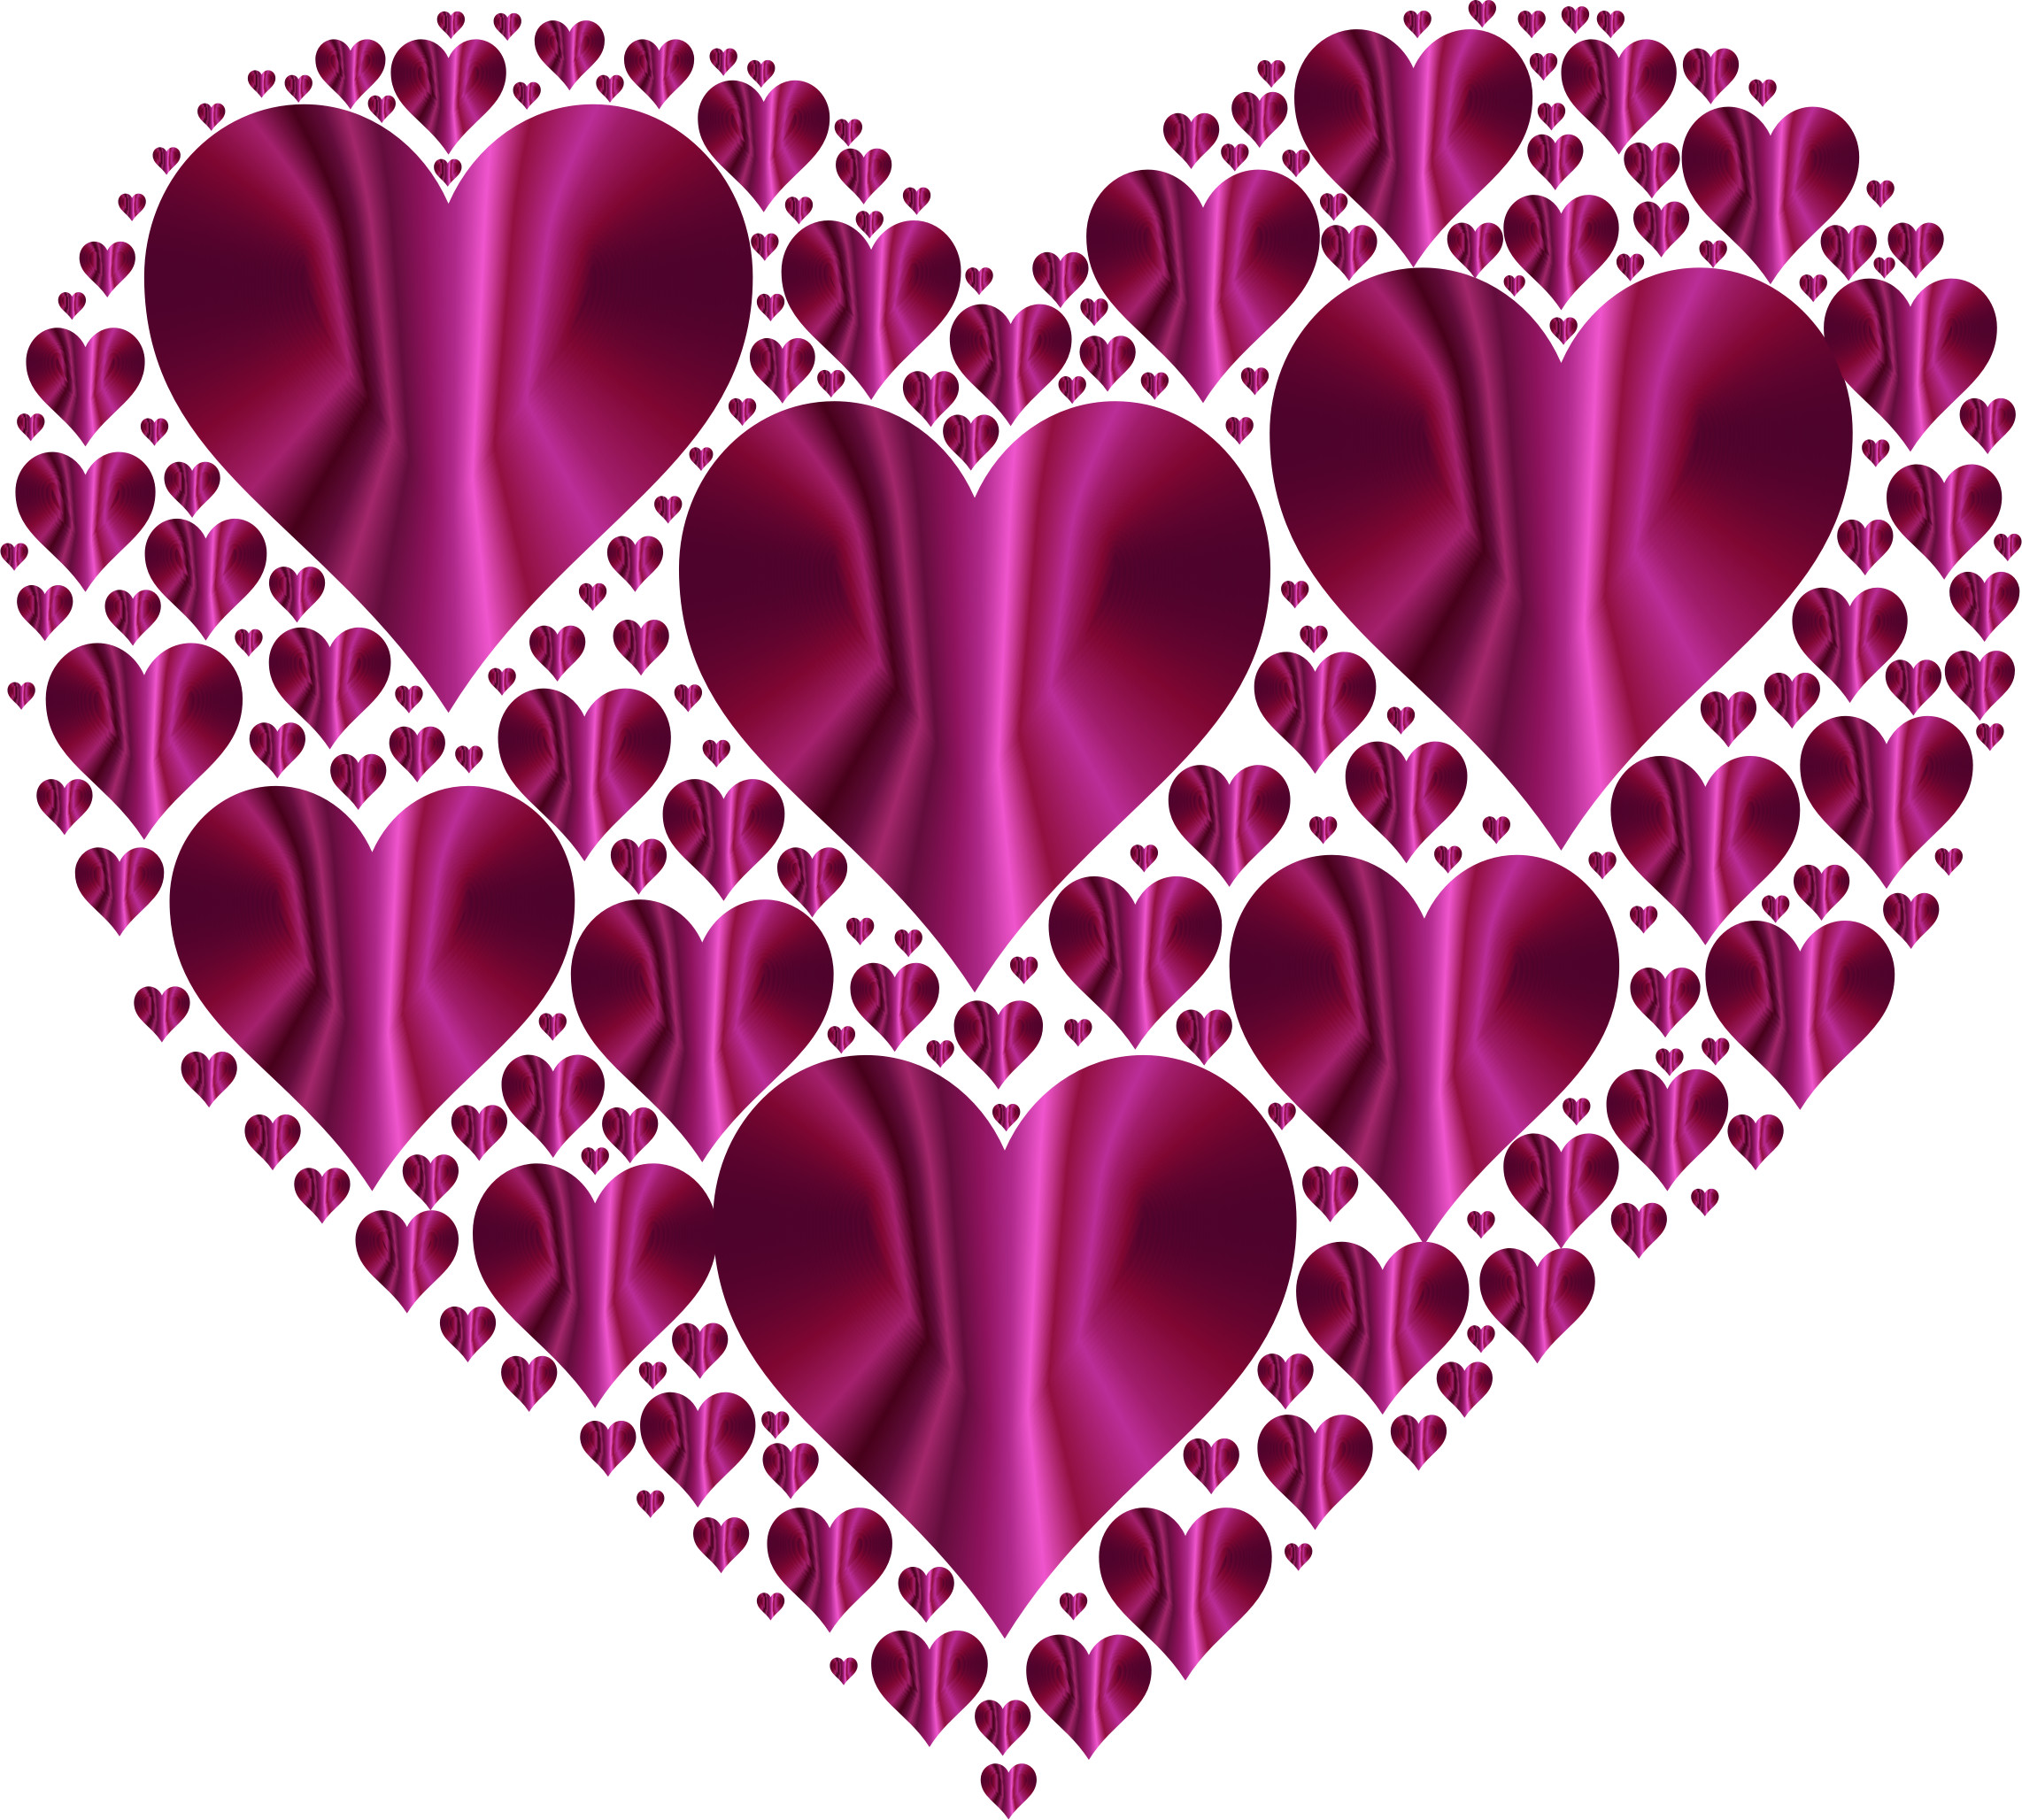 2284x2056 Hearts In Heart Rejuvenated 20 No Background